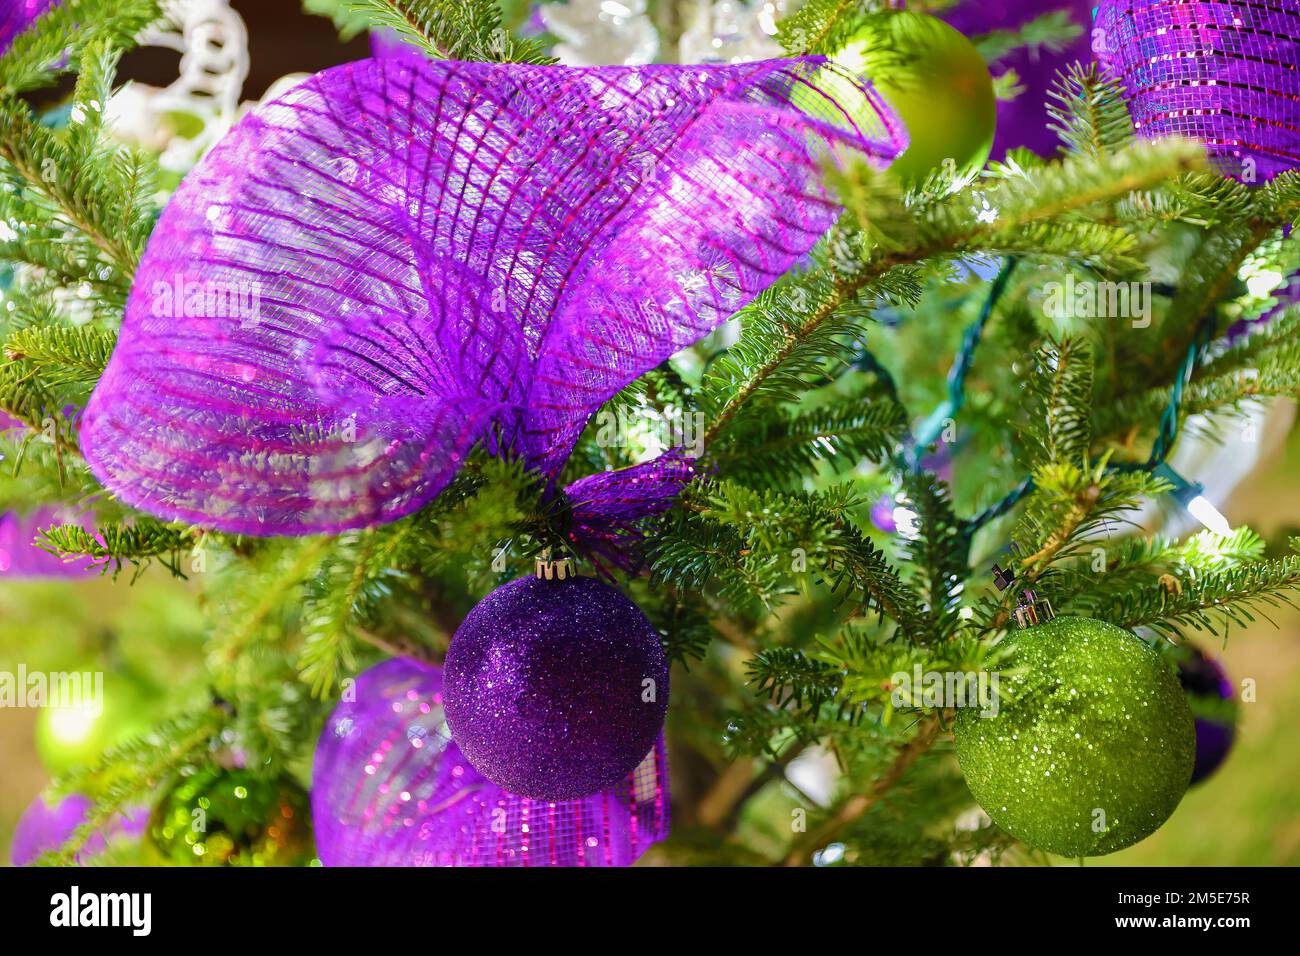 Close up of ornaments on a Christmas Tree with lights and other decorations. Stock Photo